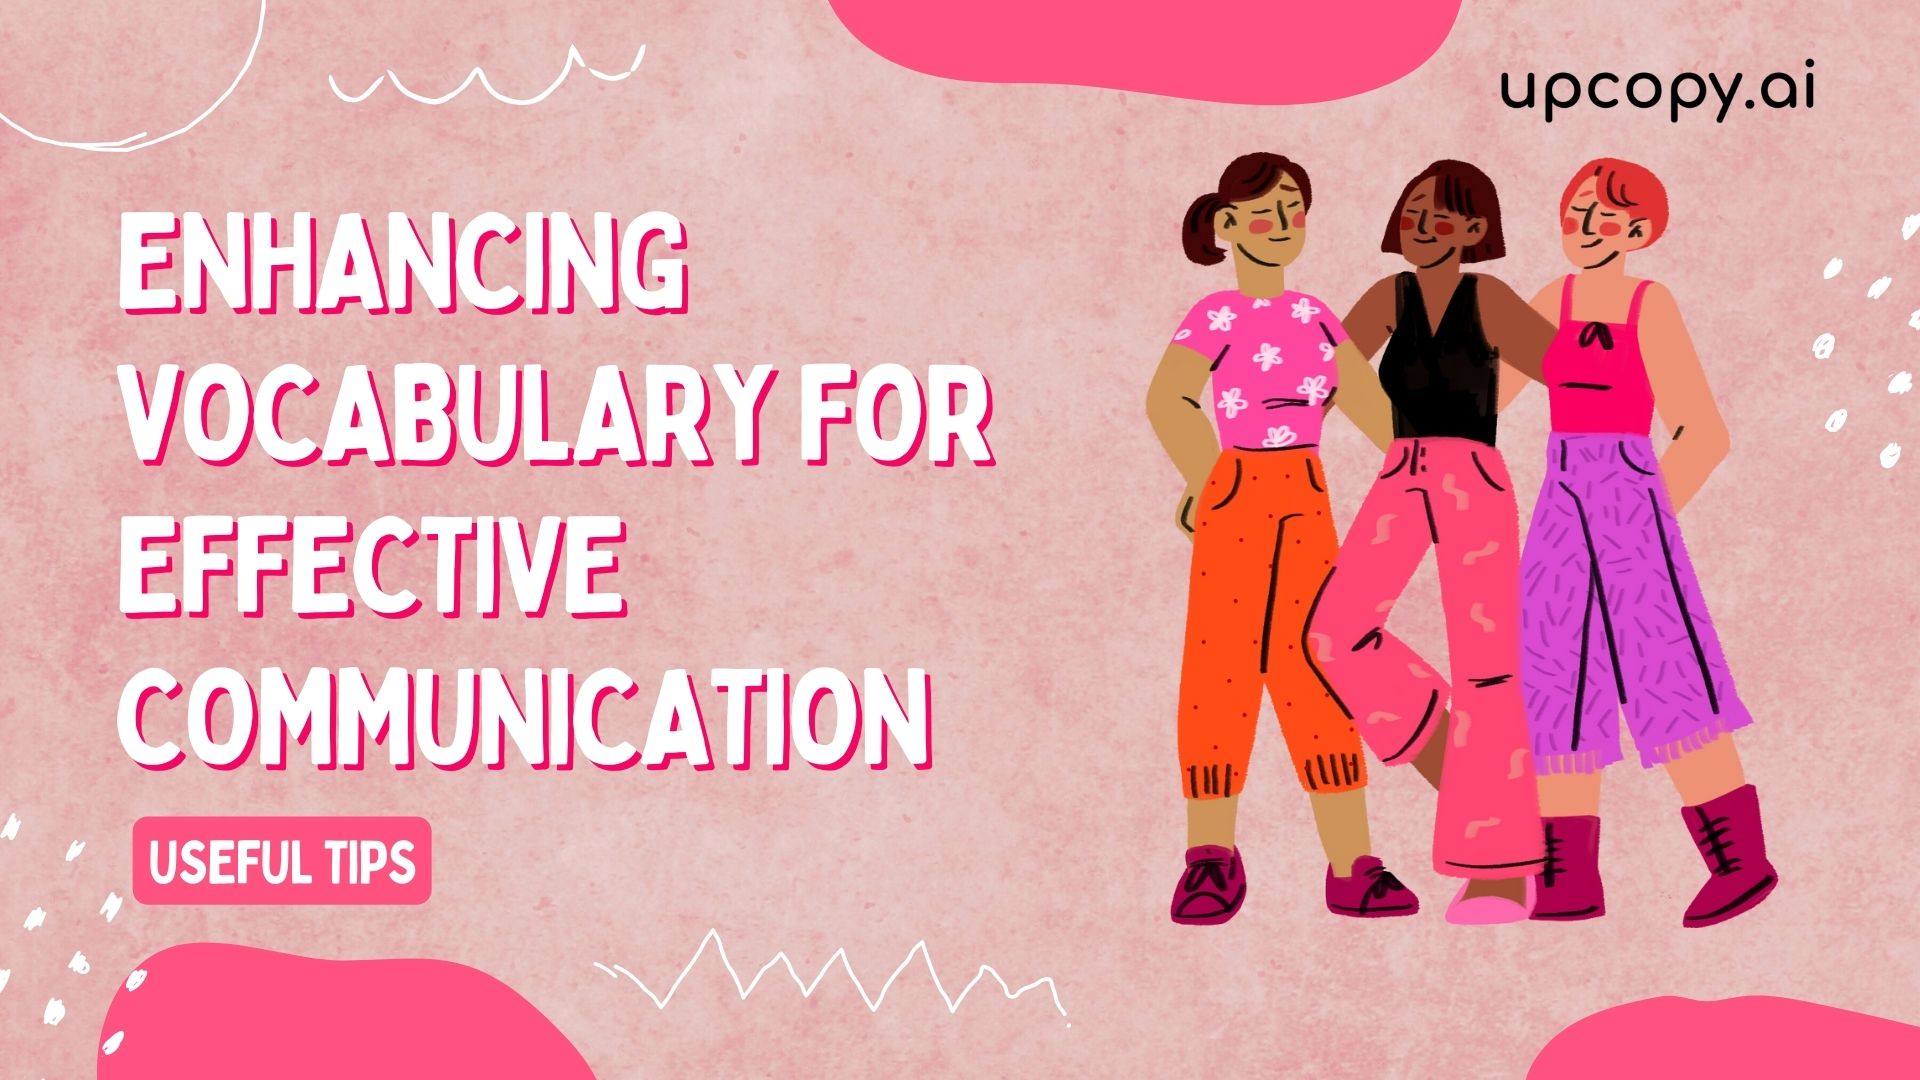 Enhancing Vocabulary for Effective Communication: Useful Tips - Upcopy.ai